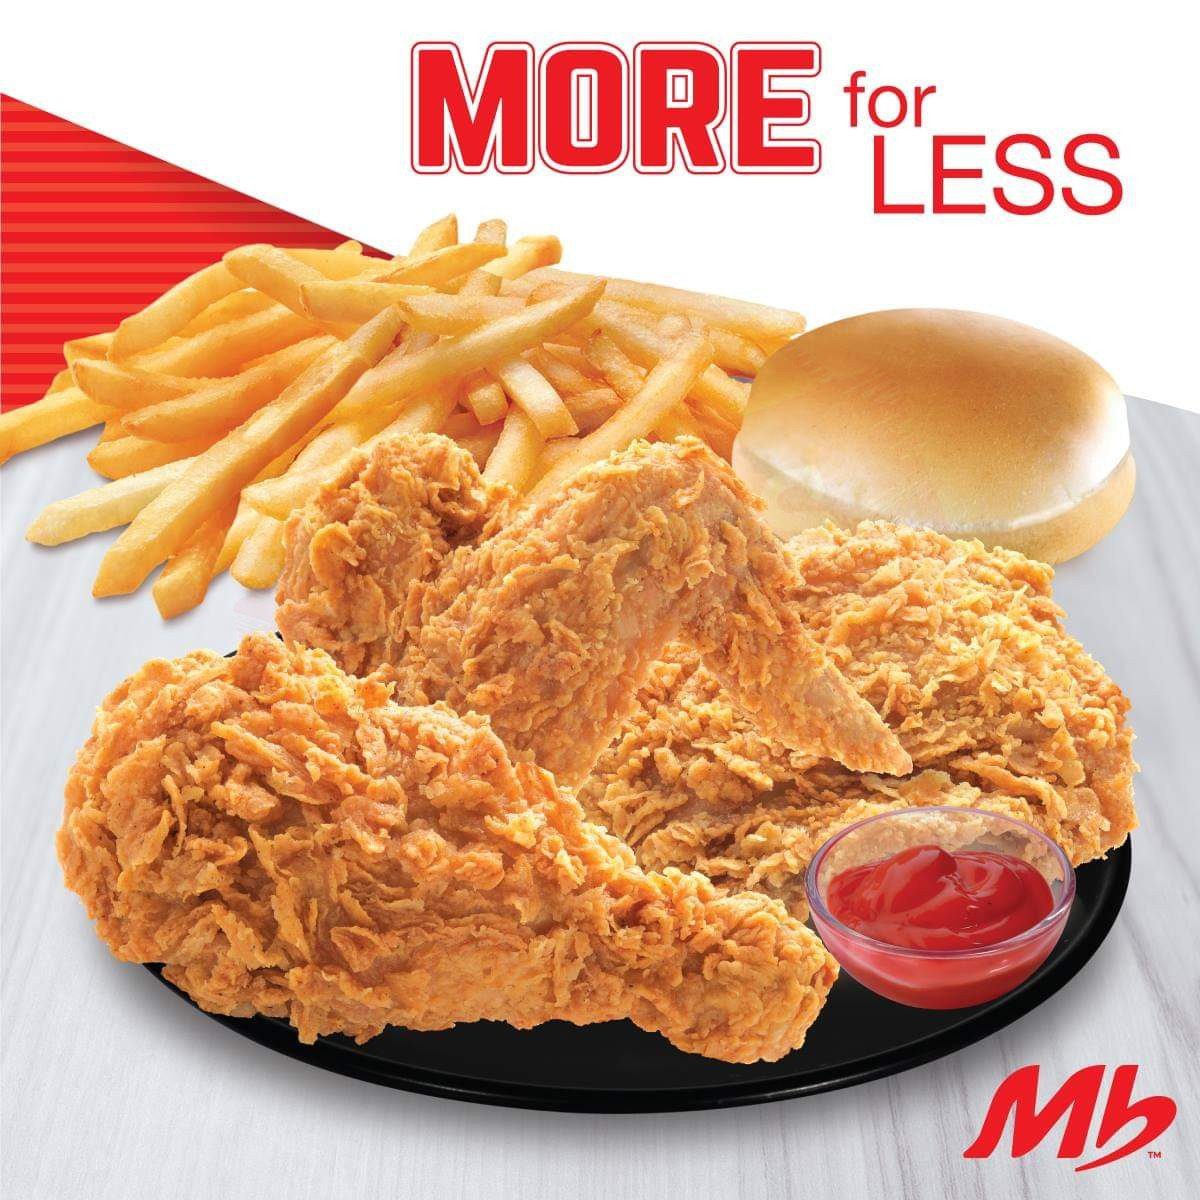 “More for Less” at Marrybrown for AED 17 only.